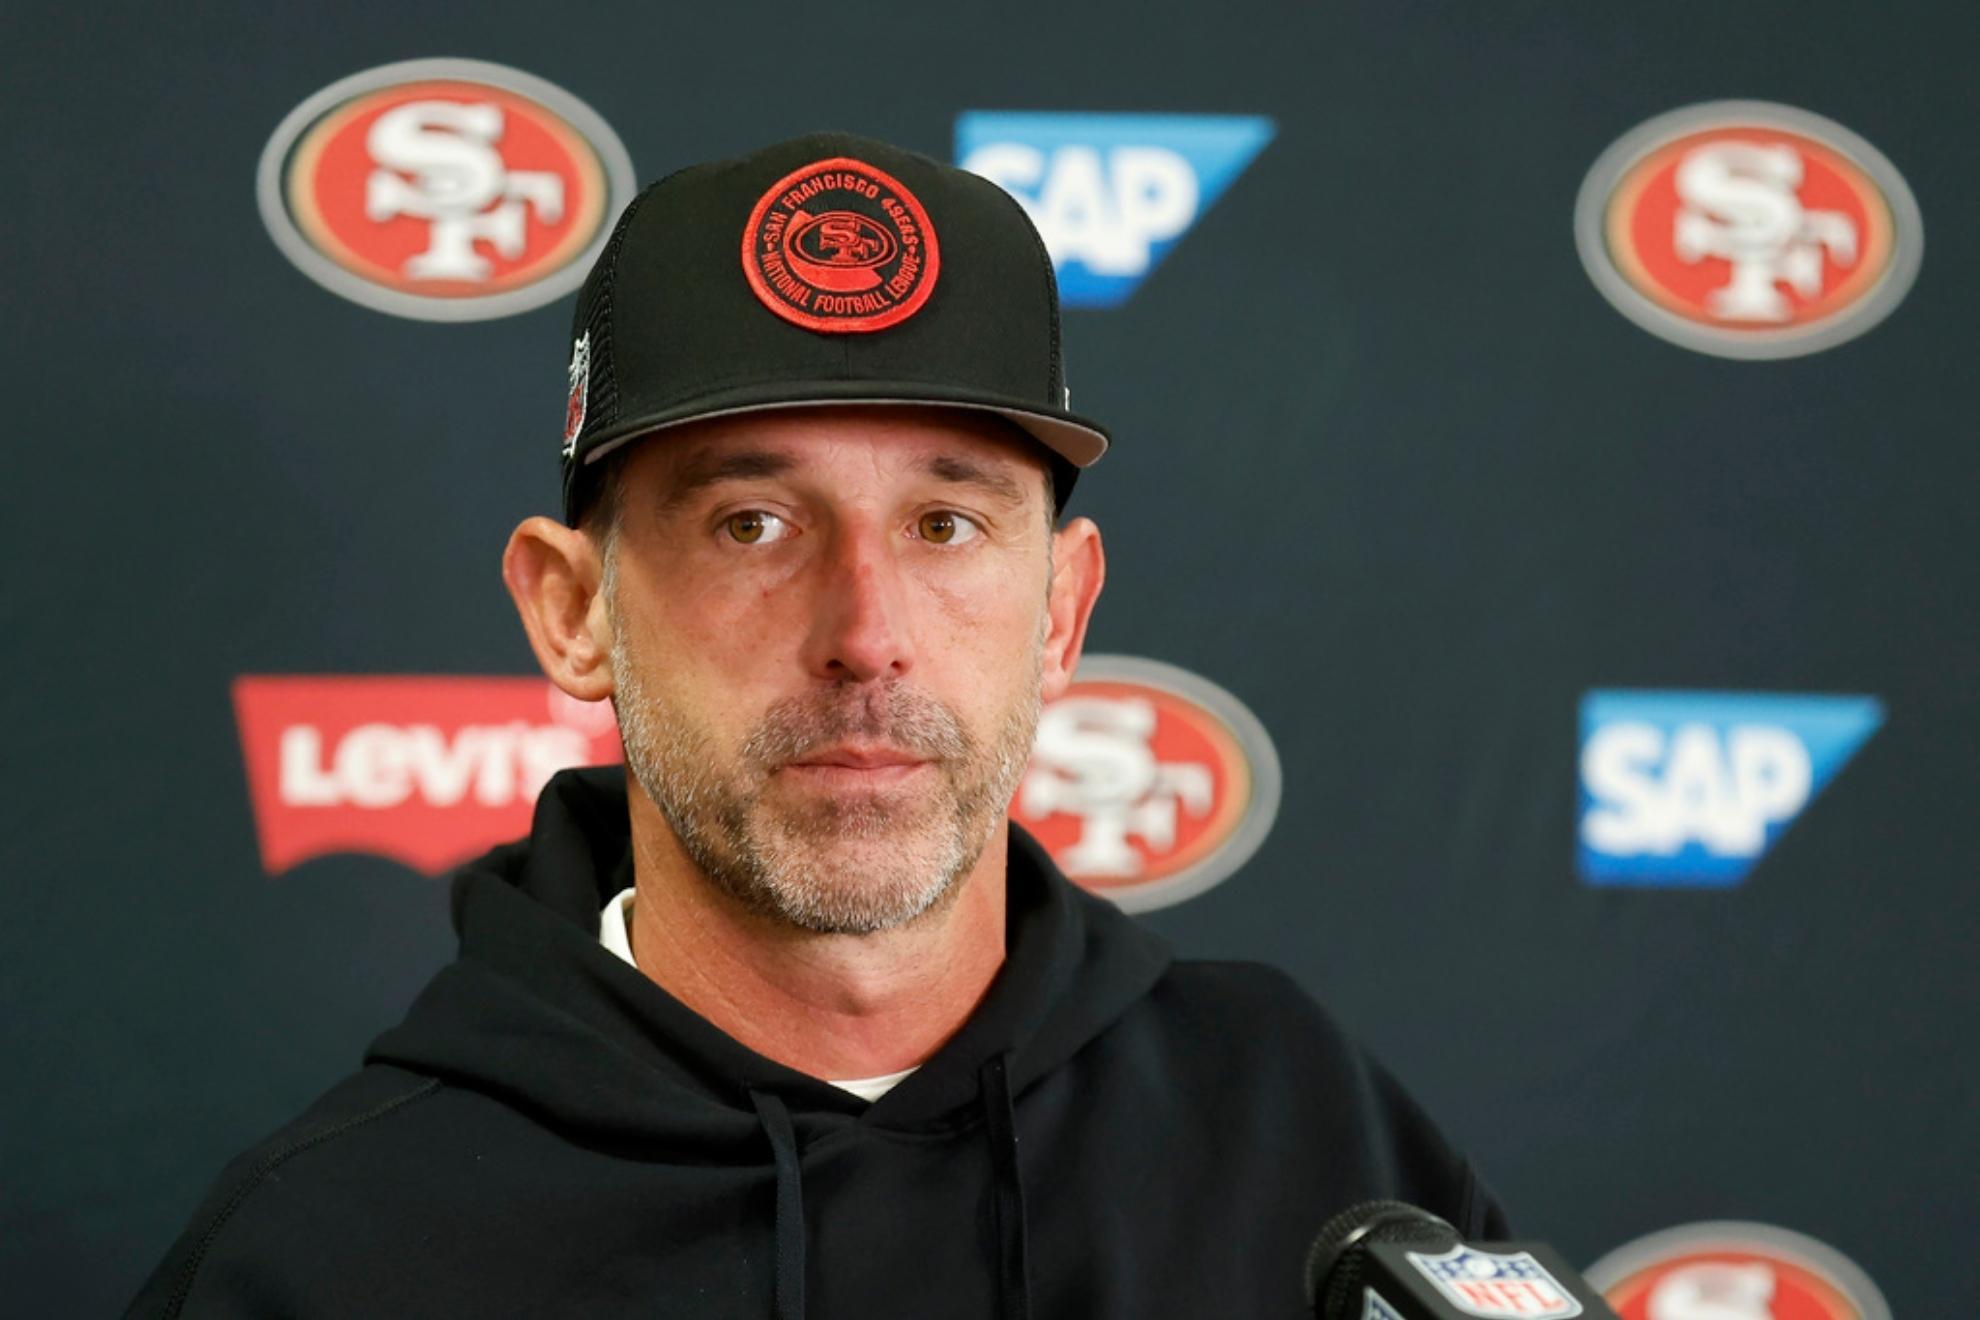 Kyle Shanahan spoke to the media about the teams' injuries